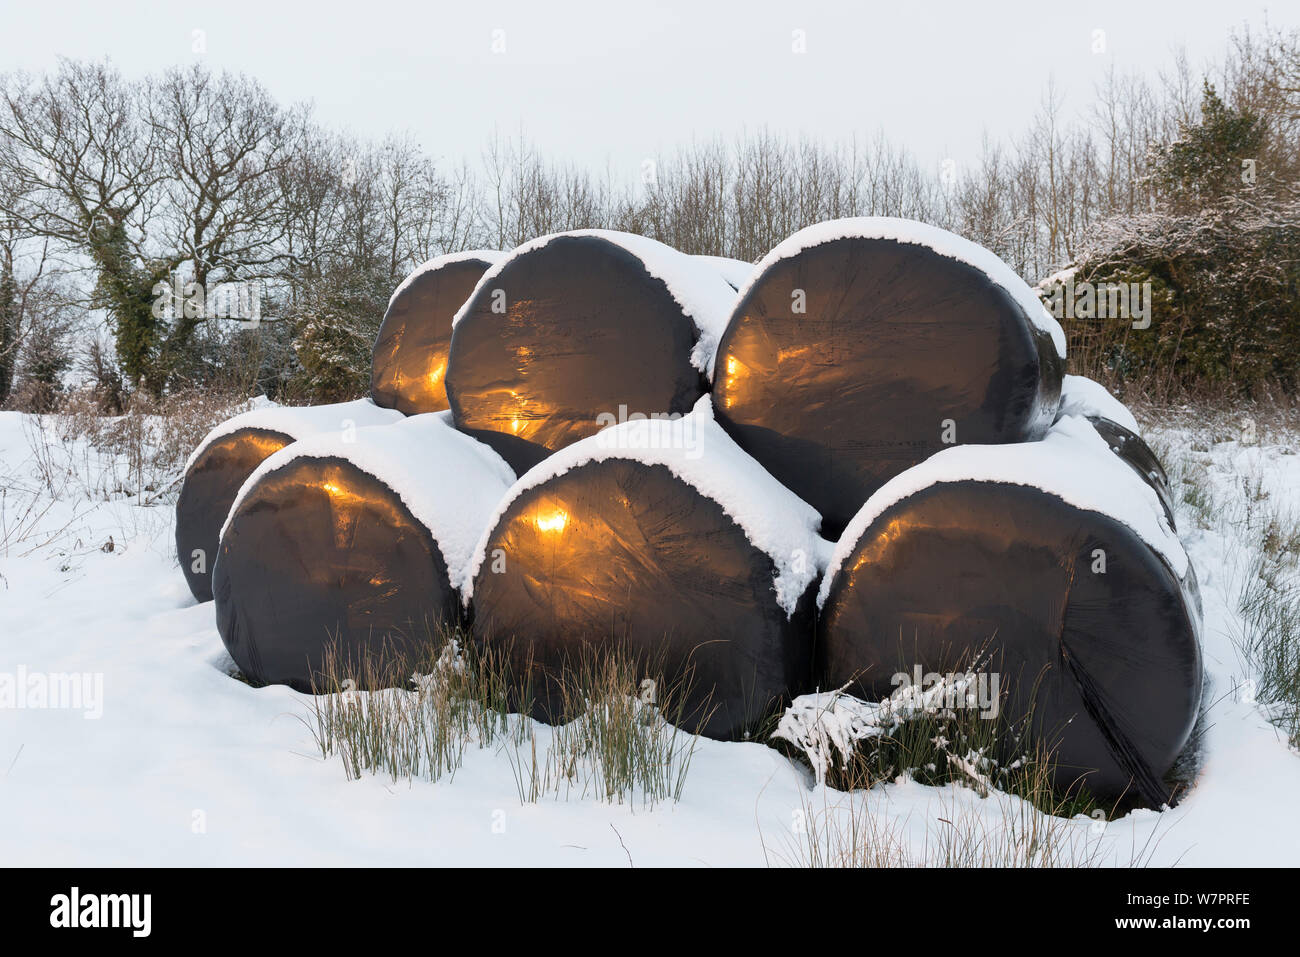 Haylage bales wrapped in black plastic, with a covering of snow, Norfolk, England, January Stock Photo